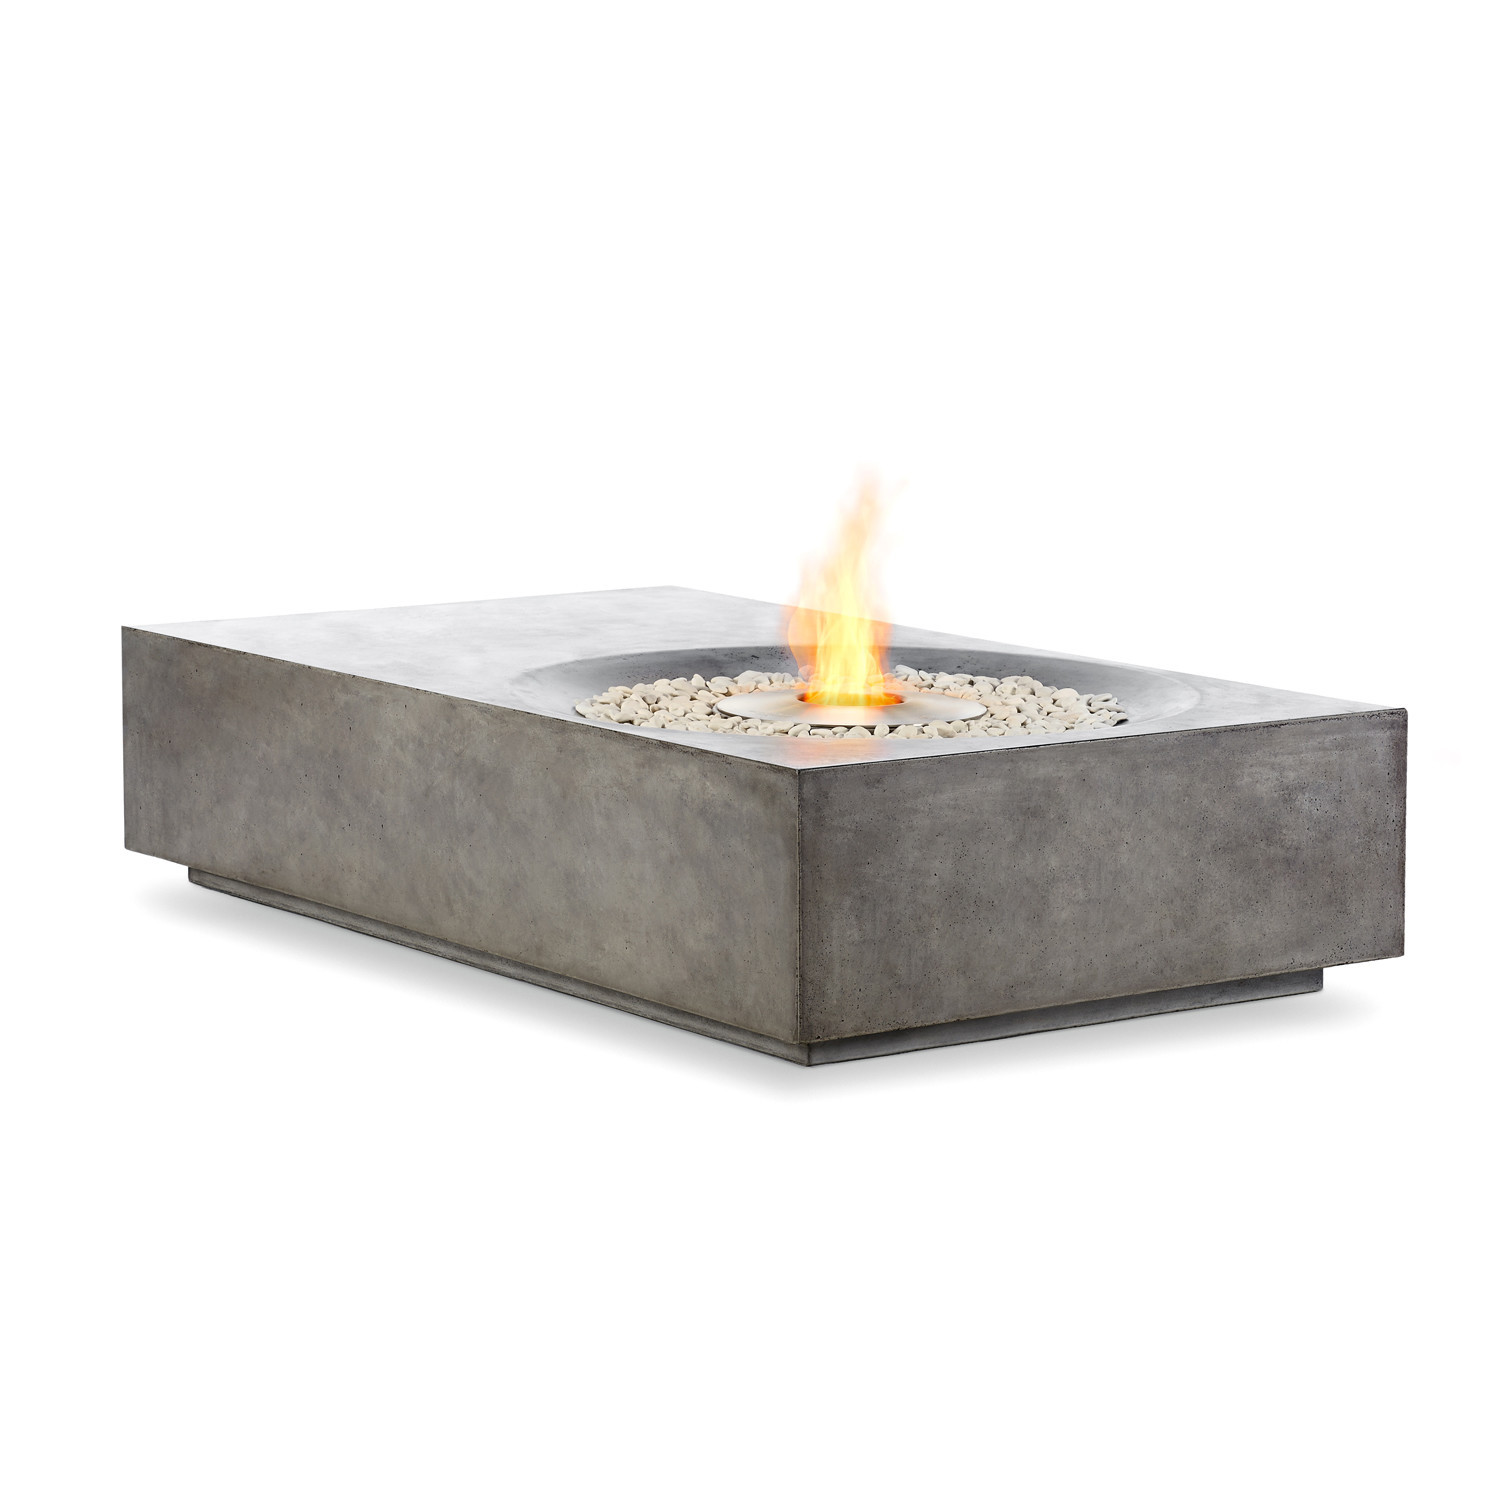 Coffee Table Fire Pit
 Brown Jordan Fires Equinox Fire Pit Coffee Table